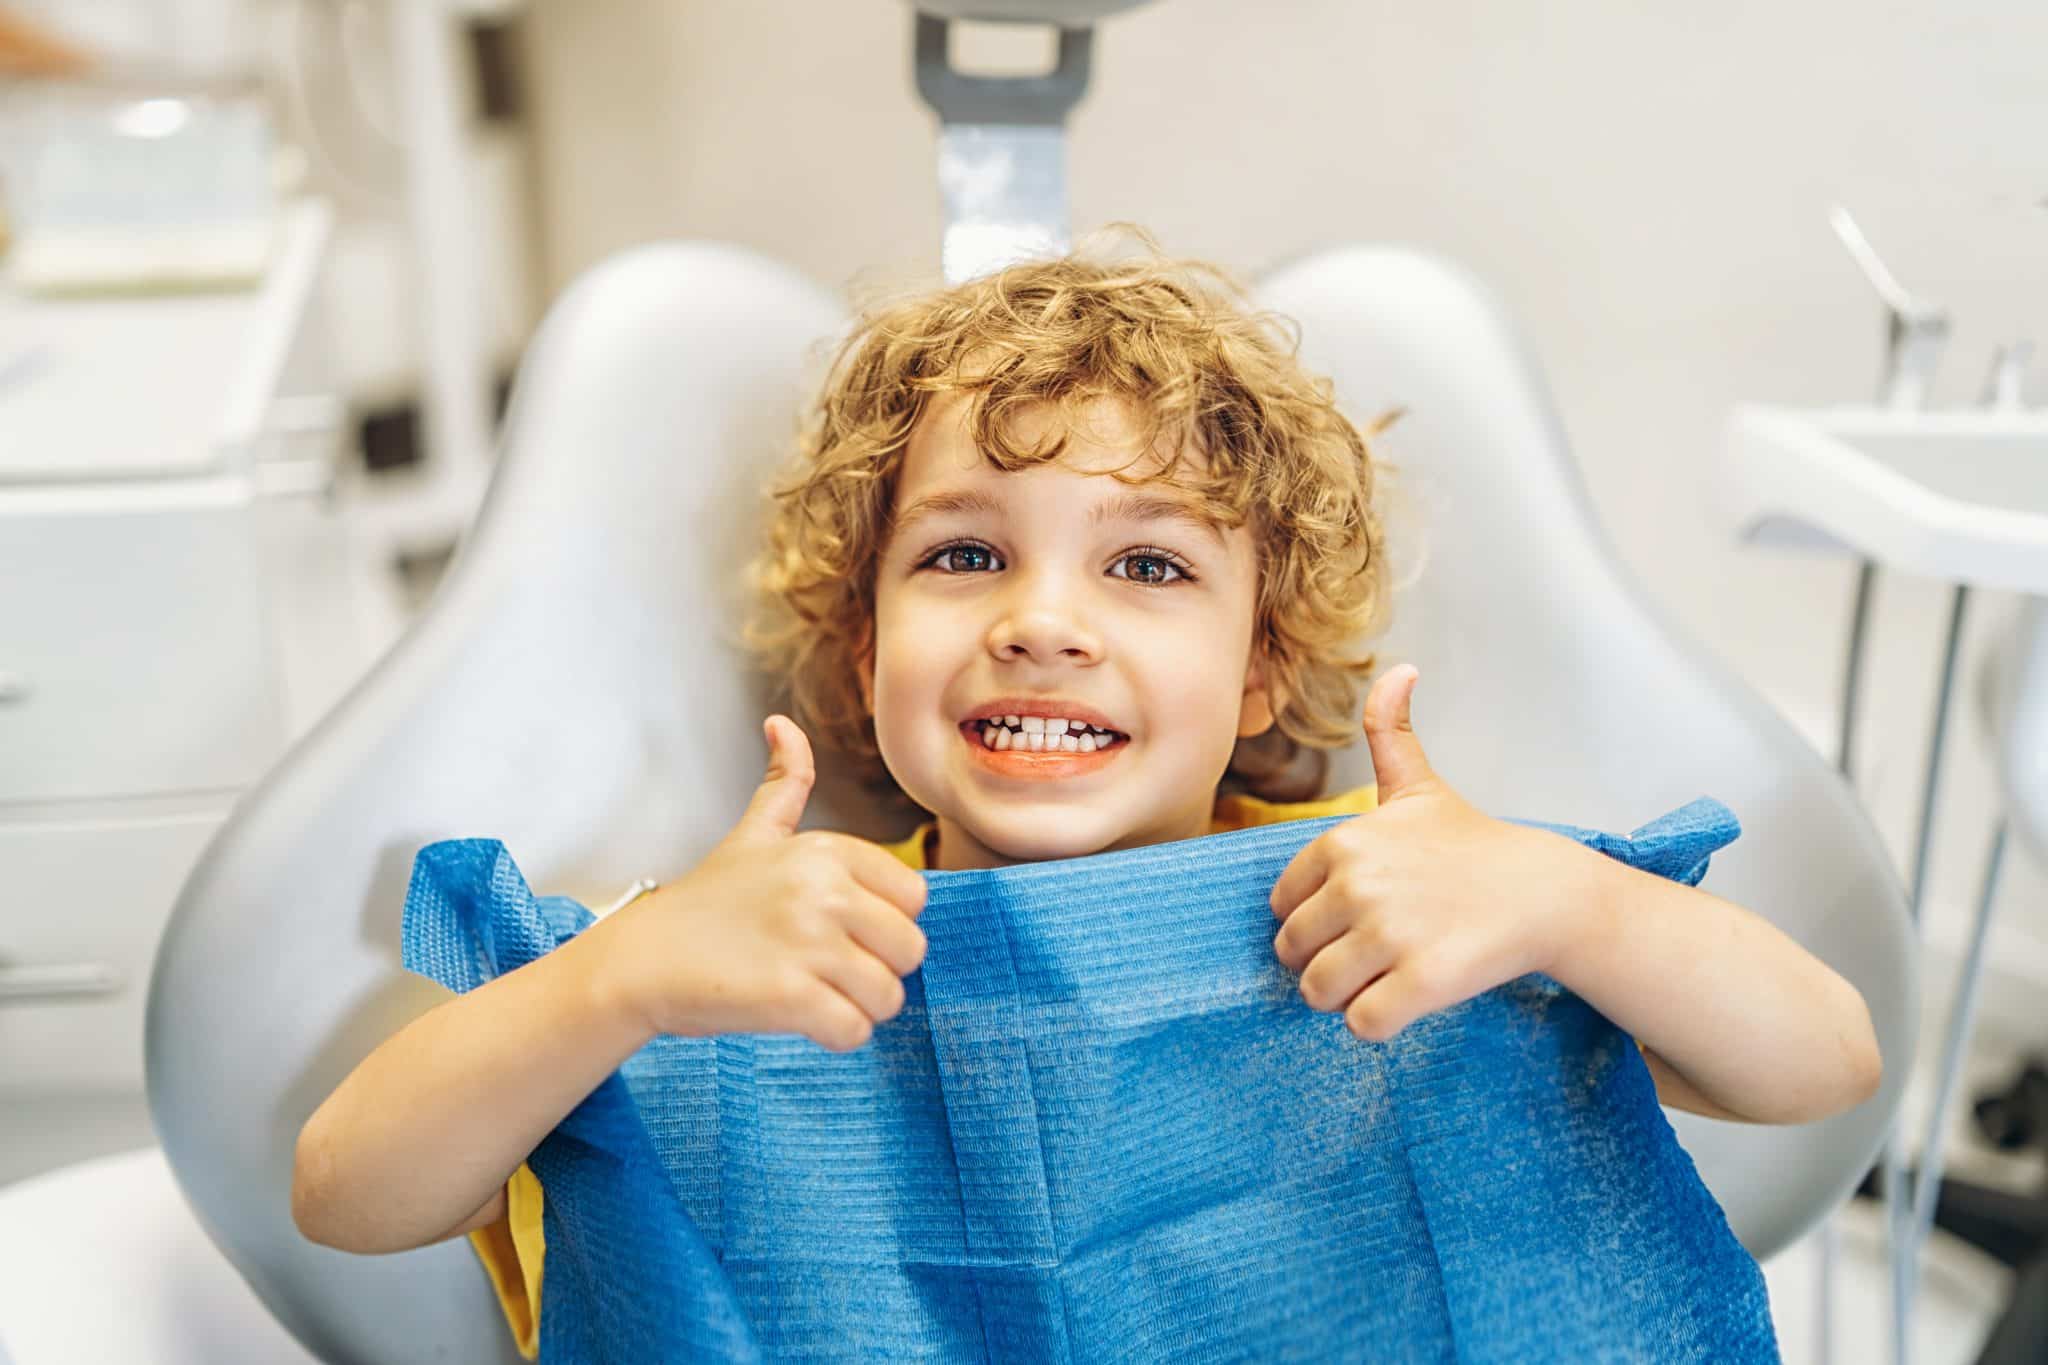 Pediatric Dentist in Reno, NV: Your Child’s Smile Matters to Us!